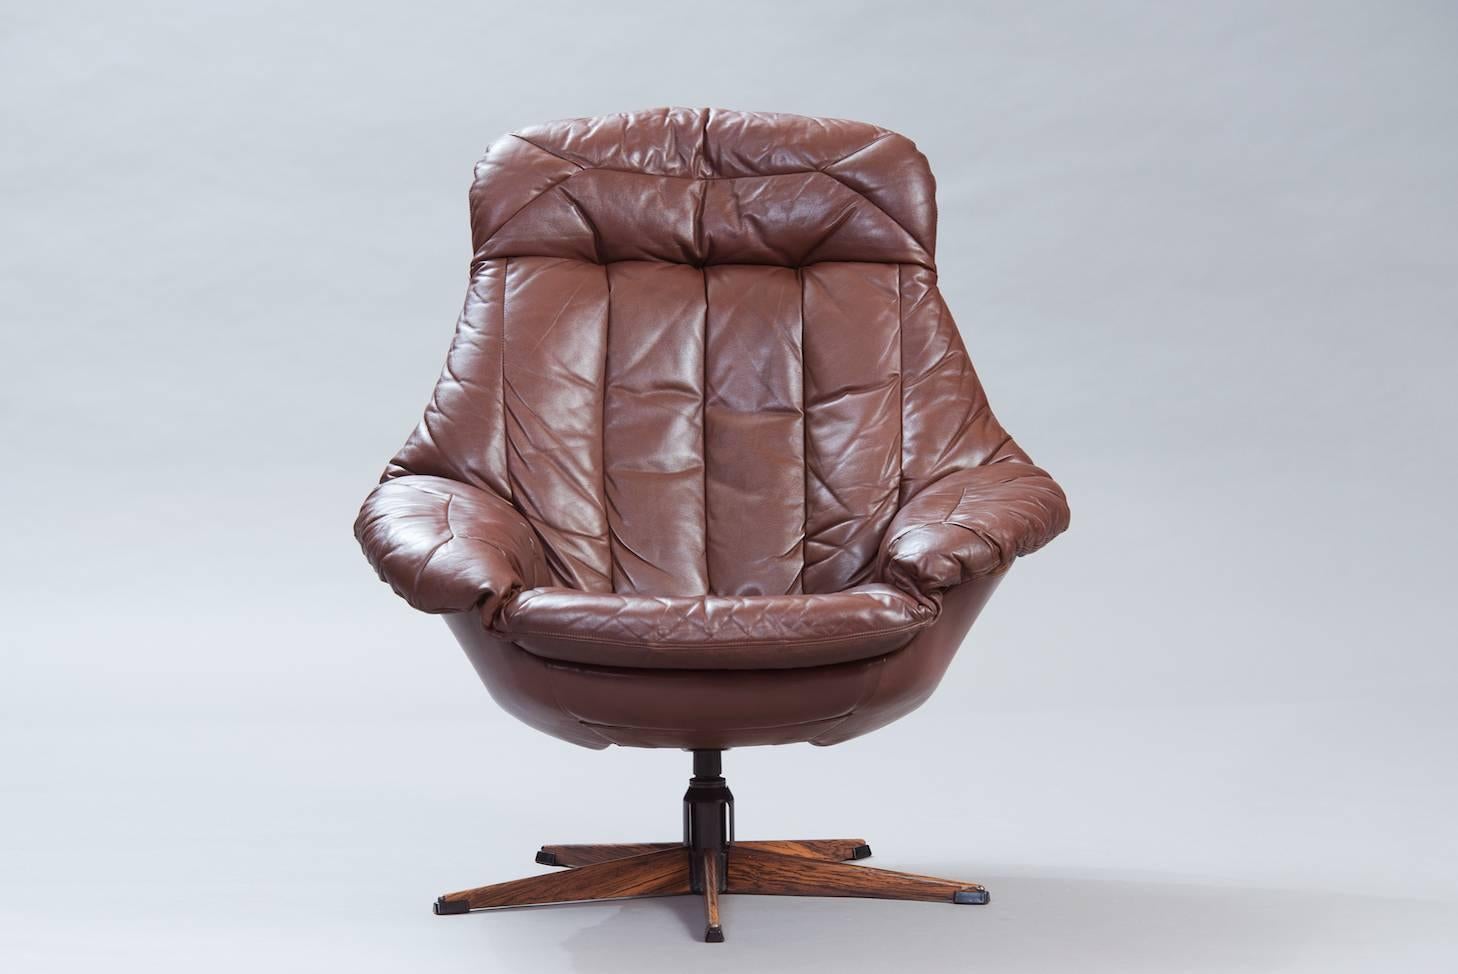 Swivel lounge chair “Silhouette” model in brown leather.